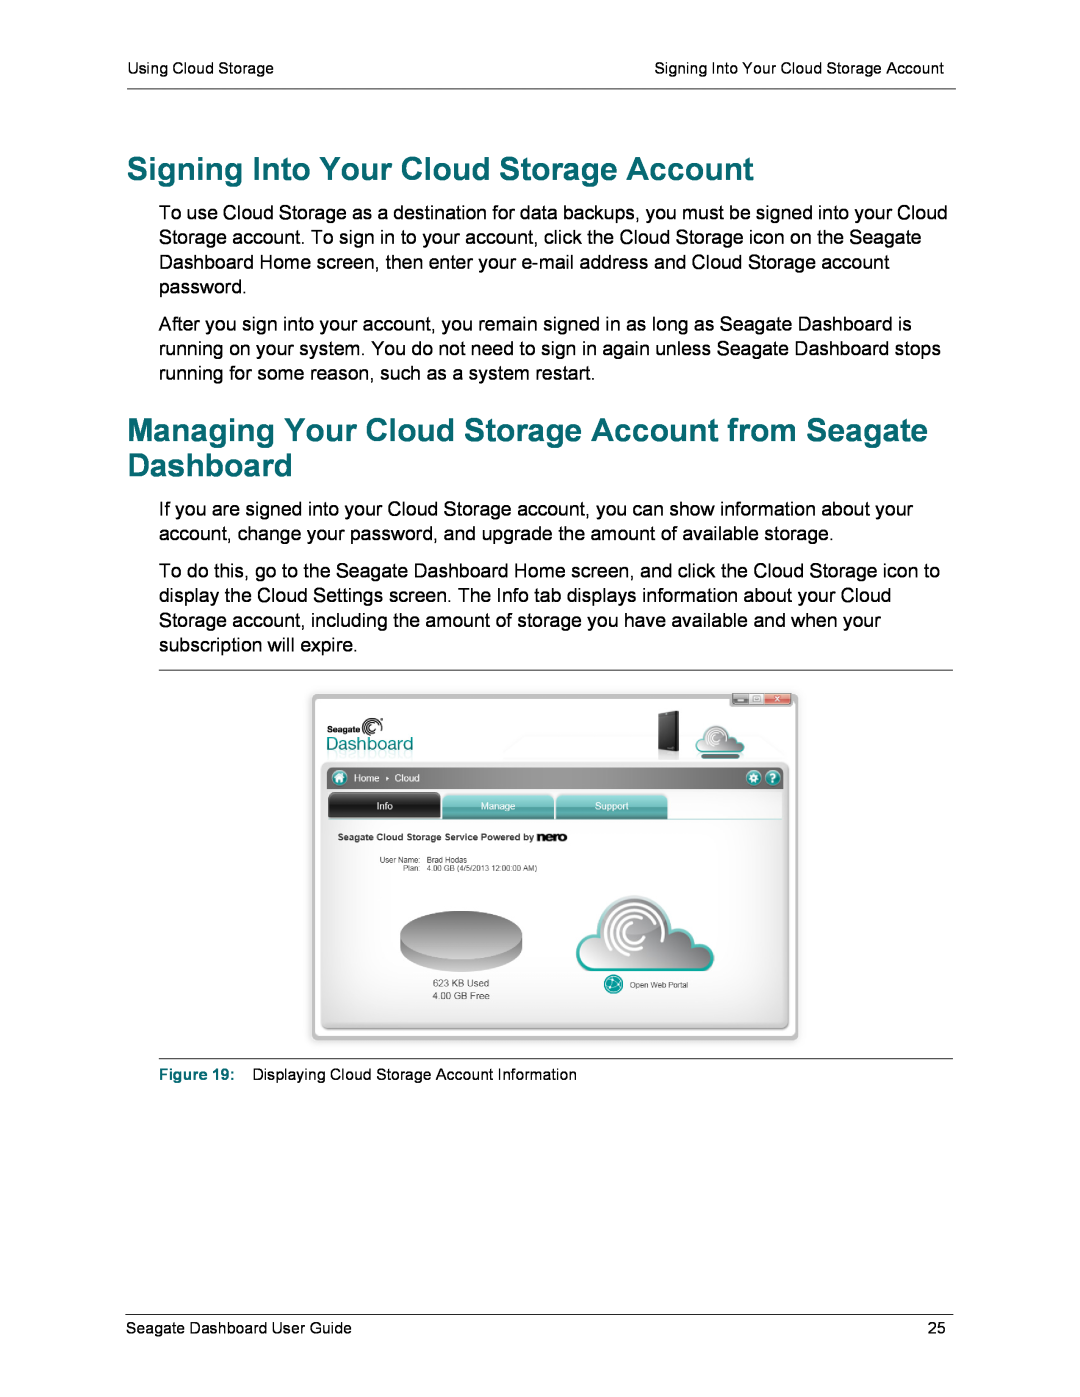 Seagate STCA4000100 Signing Into Your Cloud Storage Account, Managing Your Cloud Storage Account from Seagate Dashboard 